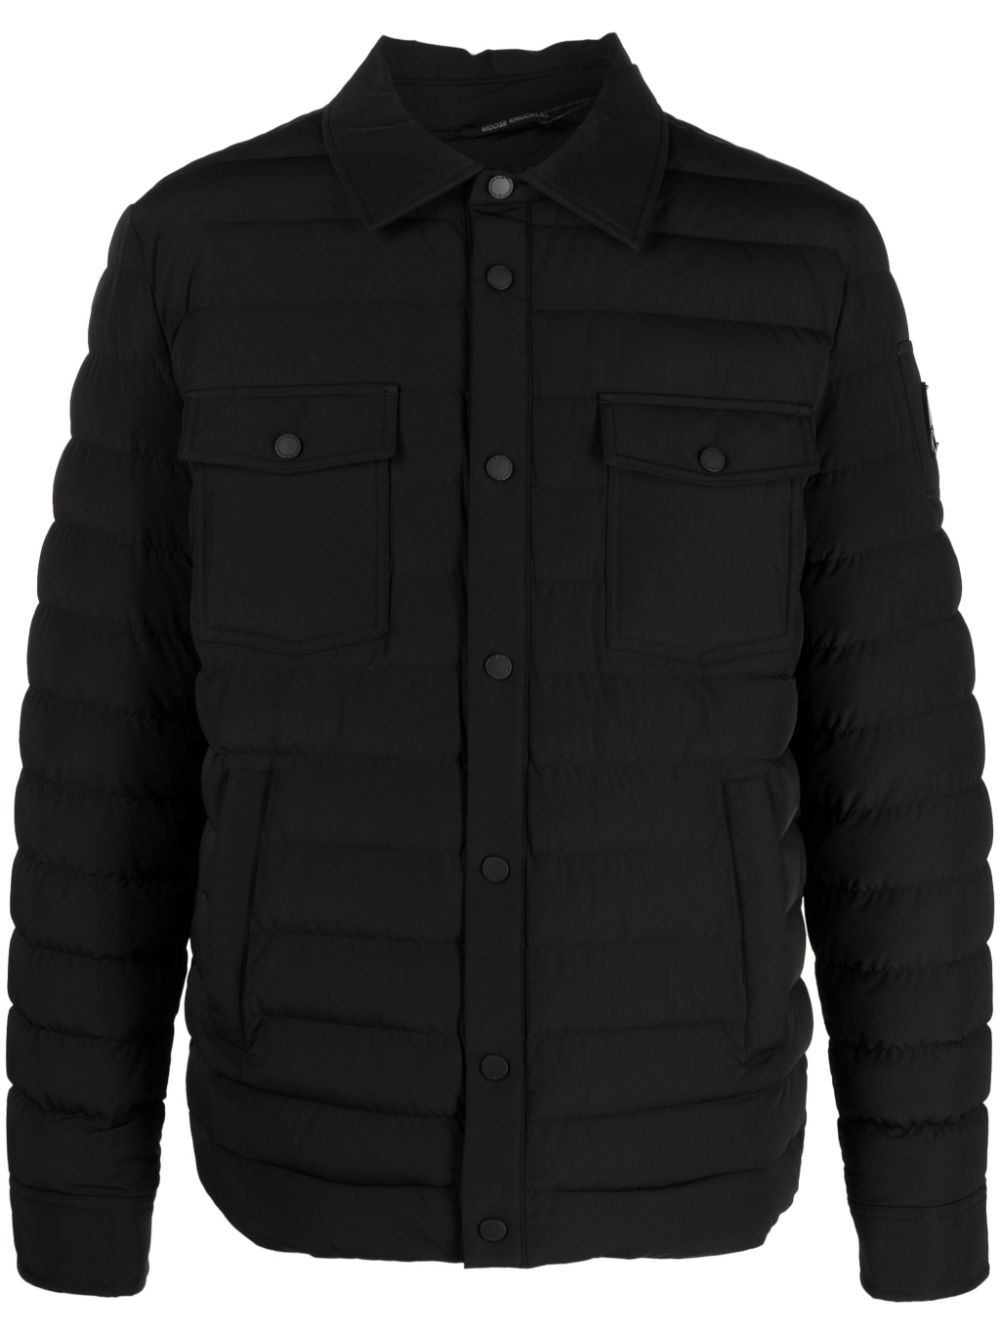 MOOSE KNUCKLES WESTMORE QUILTED SHIRT JACKET